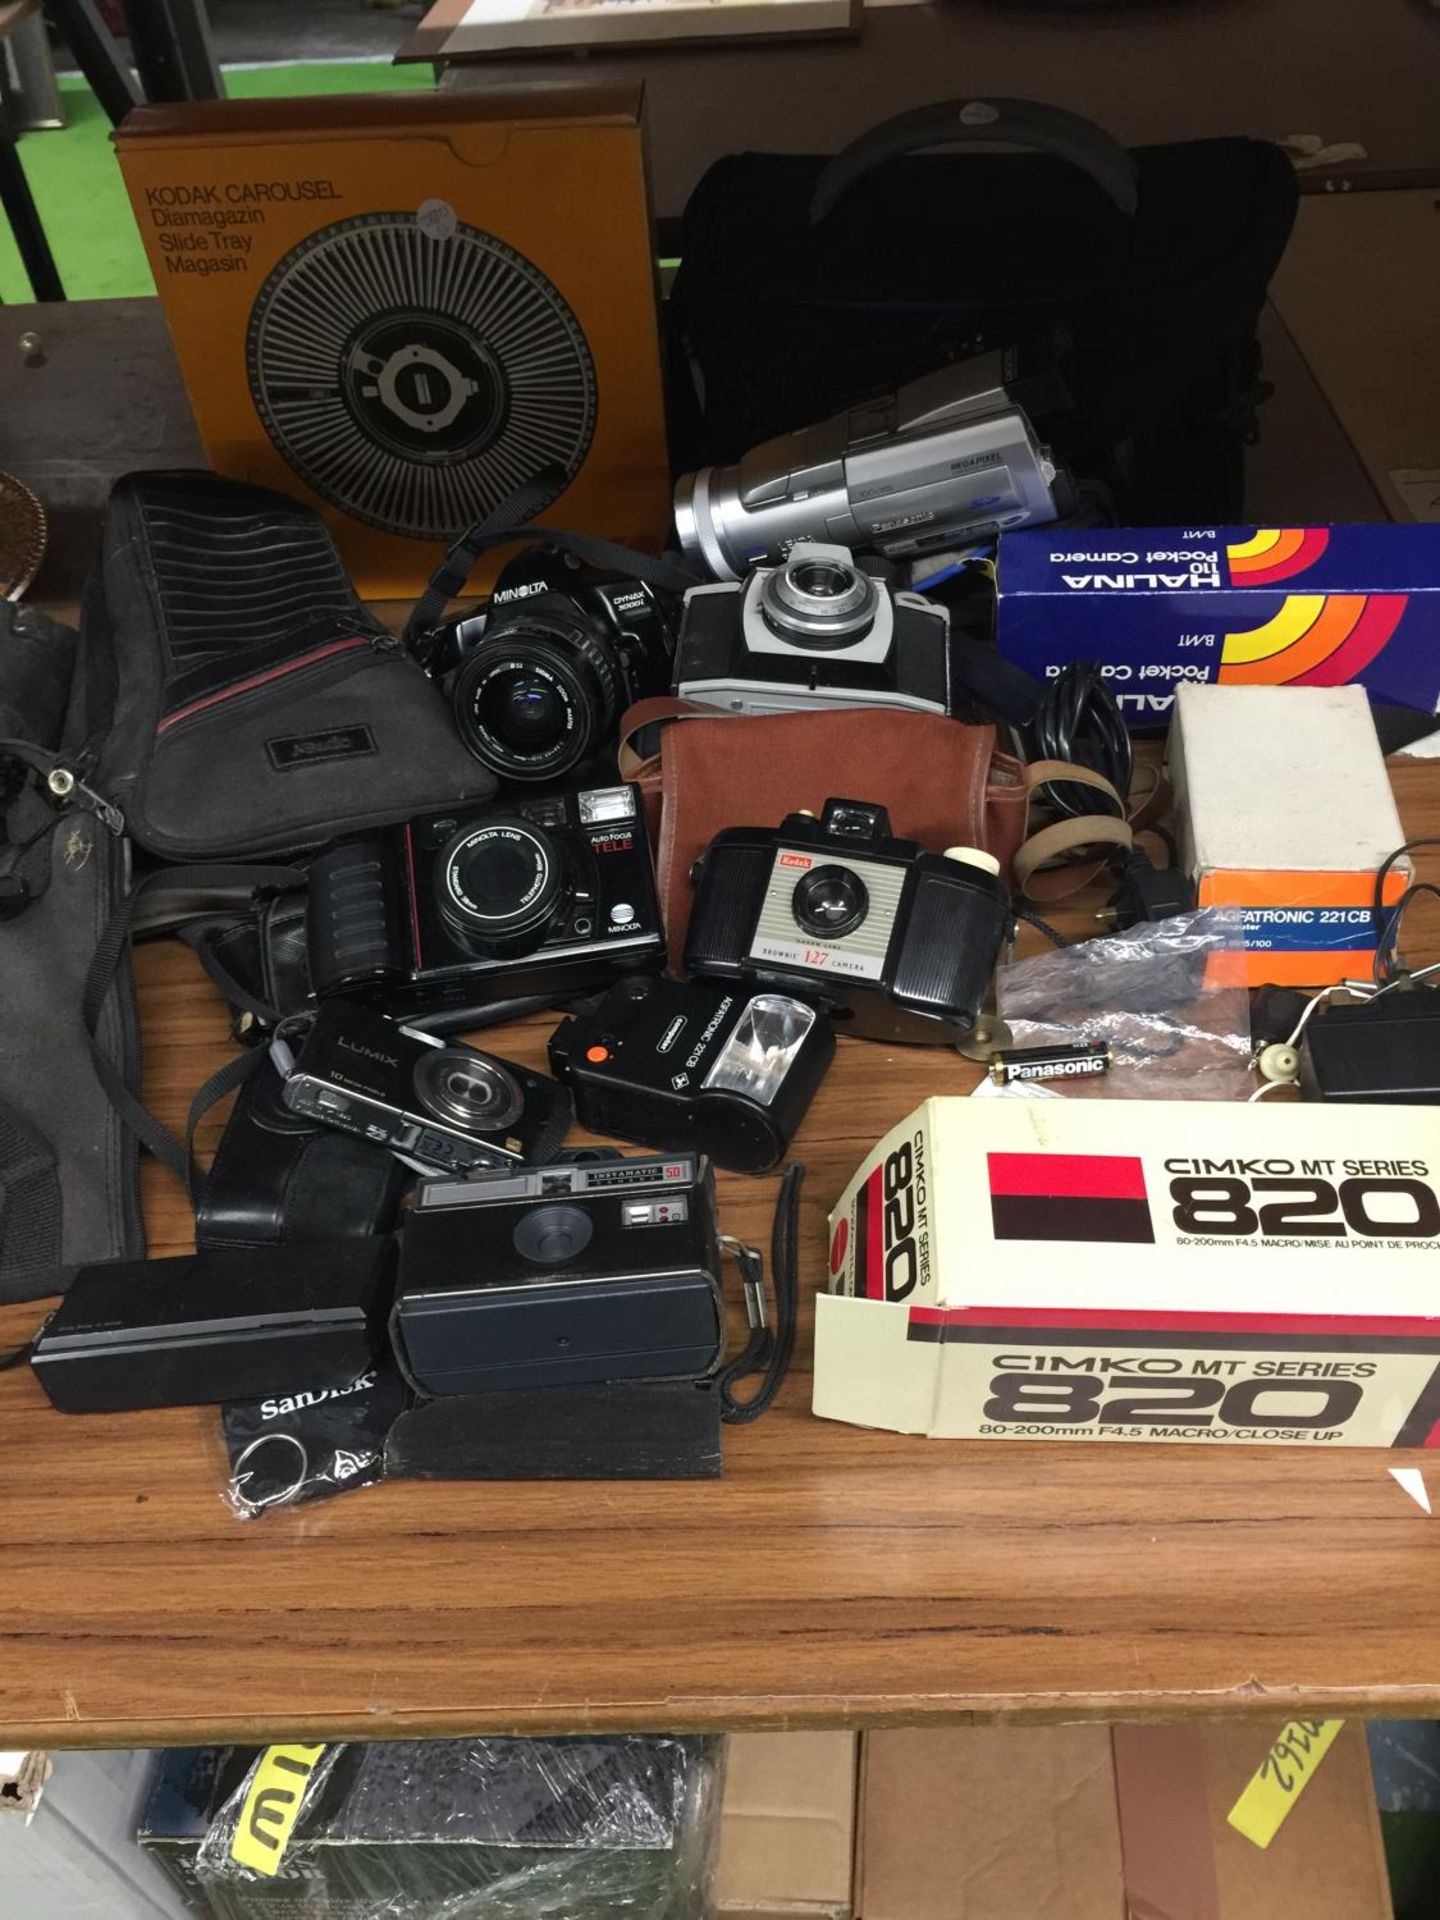 A COLLECTION OF VINTAGE CAMERAS AND ACCESSORIES TO INCLUDE A KODAK BROWNIE 127, MINOLTA AUTO FOCUS